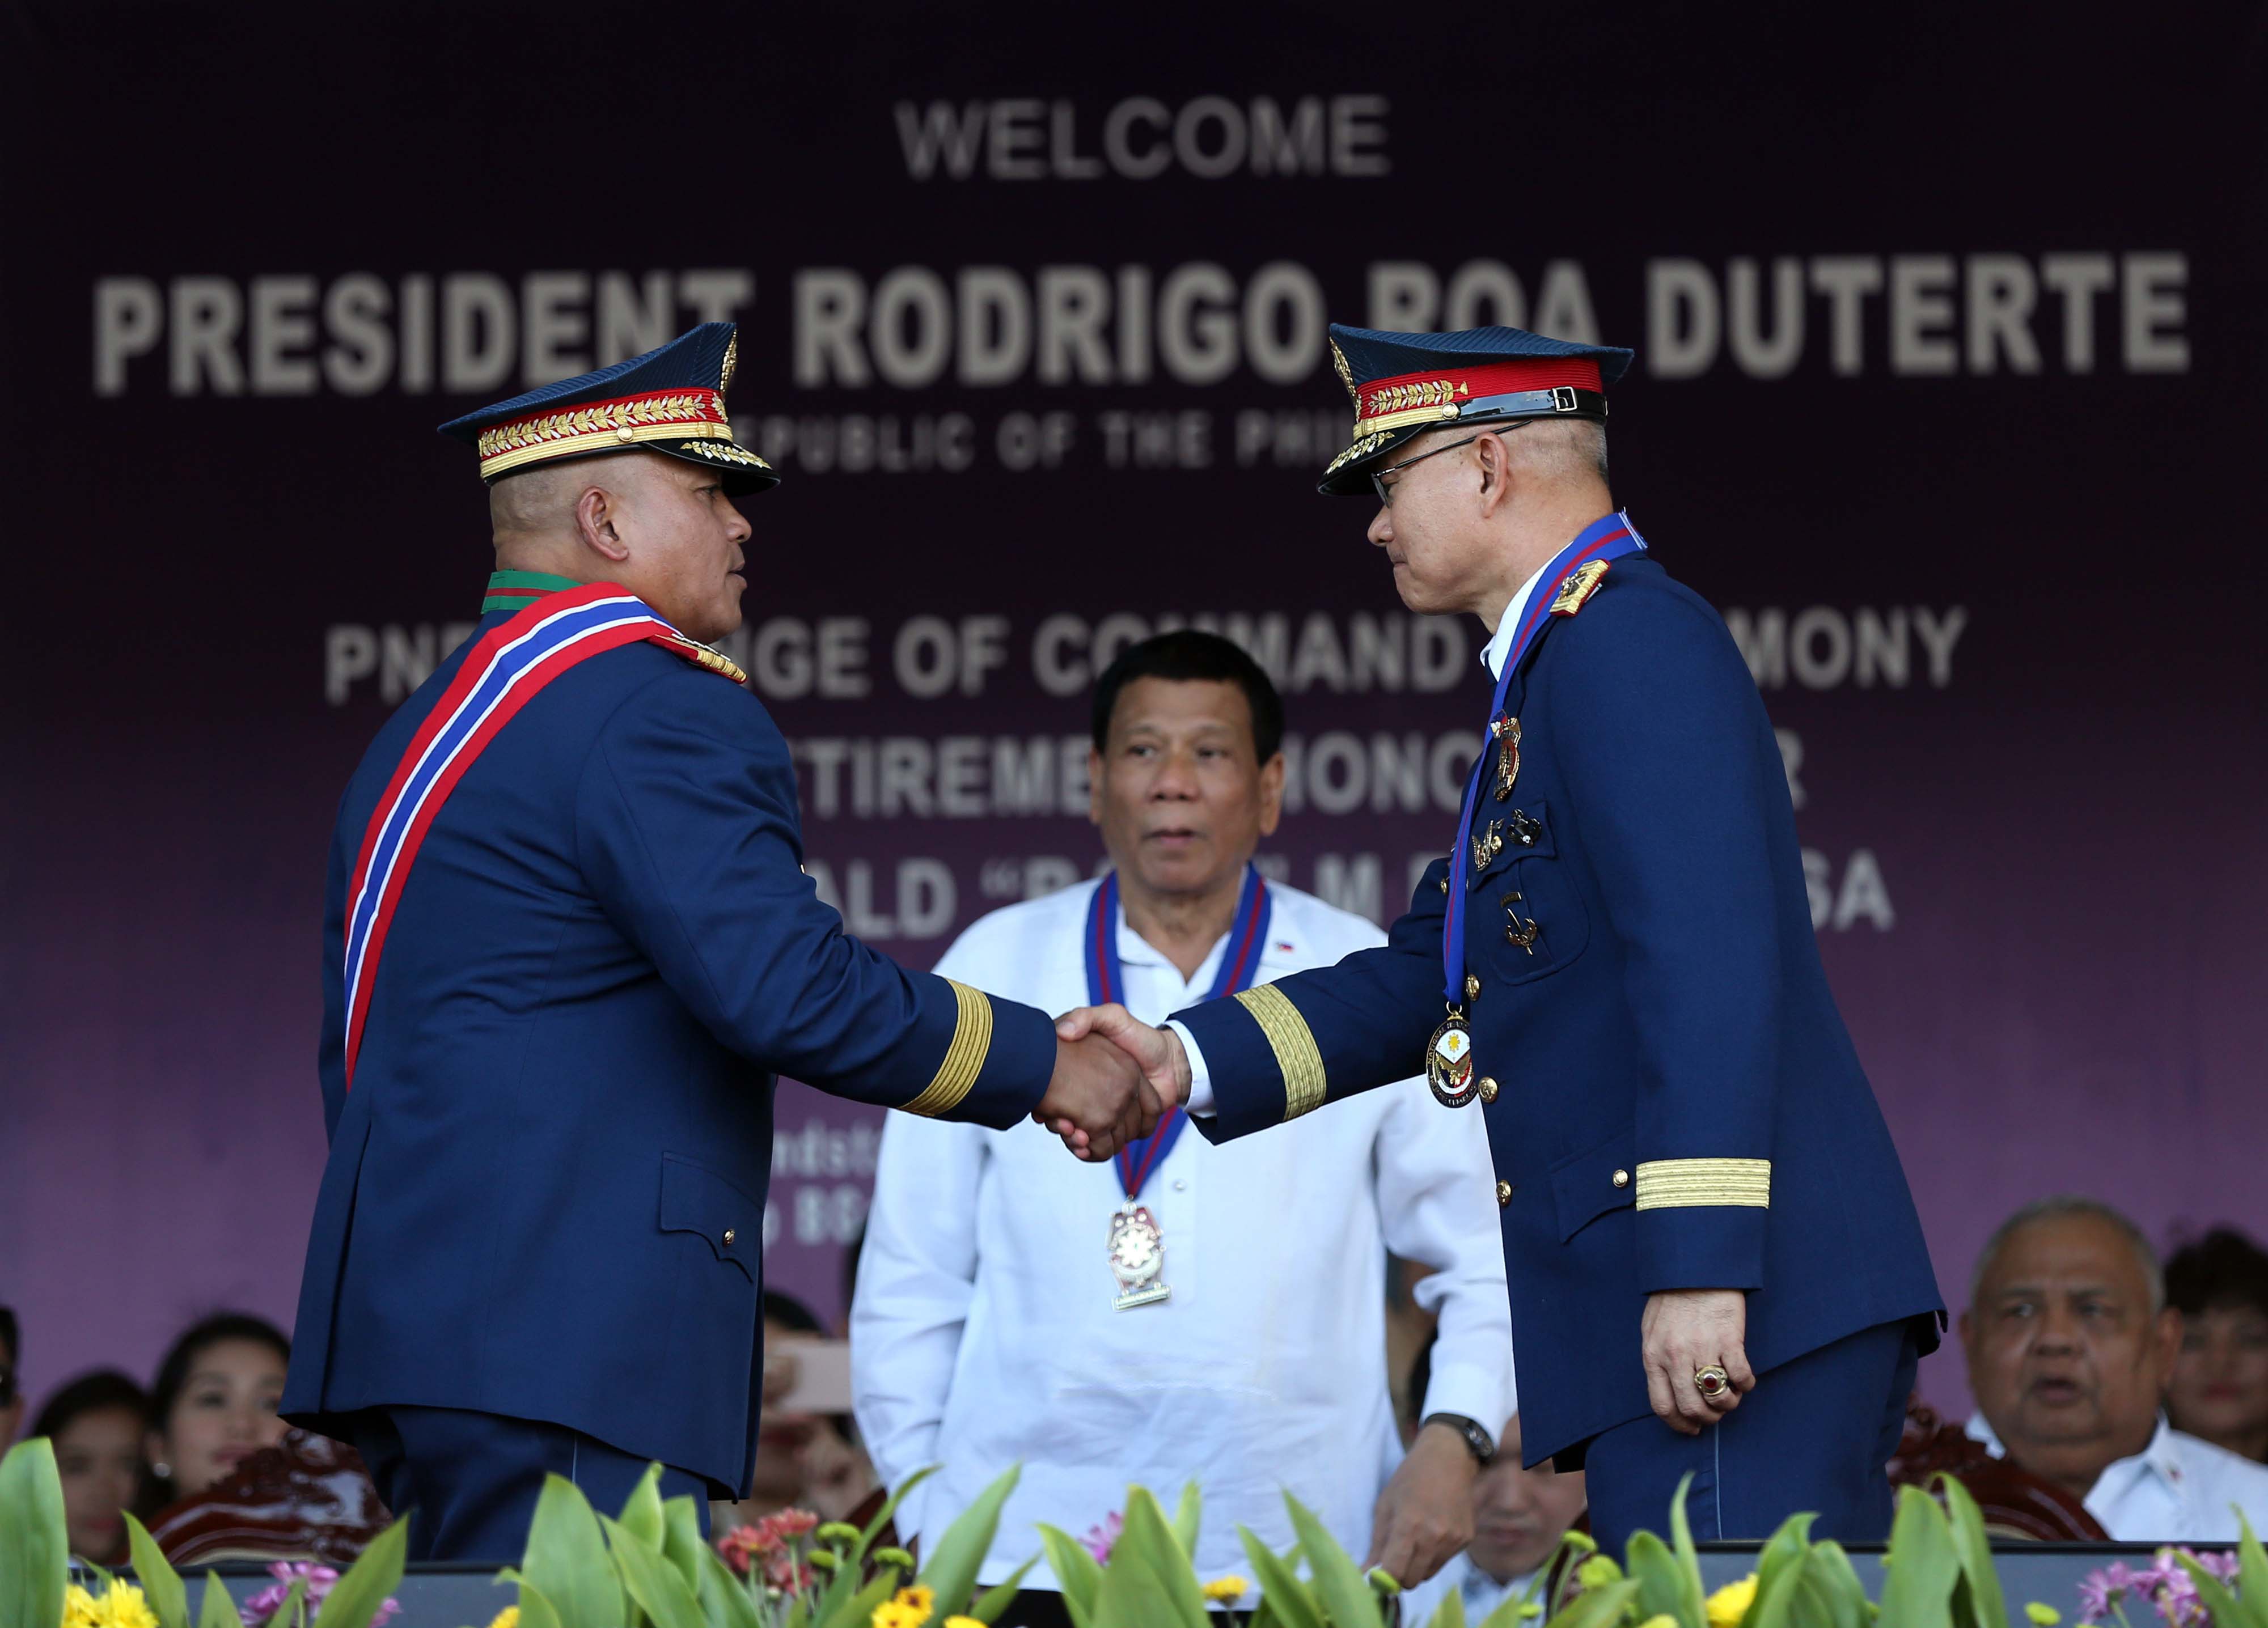 Turnover ceremony of outgoing PNP chief DG Ronald dela Rosa to new PNP chief DG Oscar Albayalde with guest of honor Pres. Rodrigo R. Duterte in Camp Crame. INQUIRER PHOTO/LYN RILLON